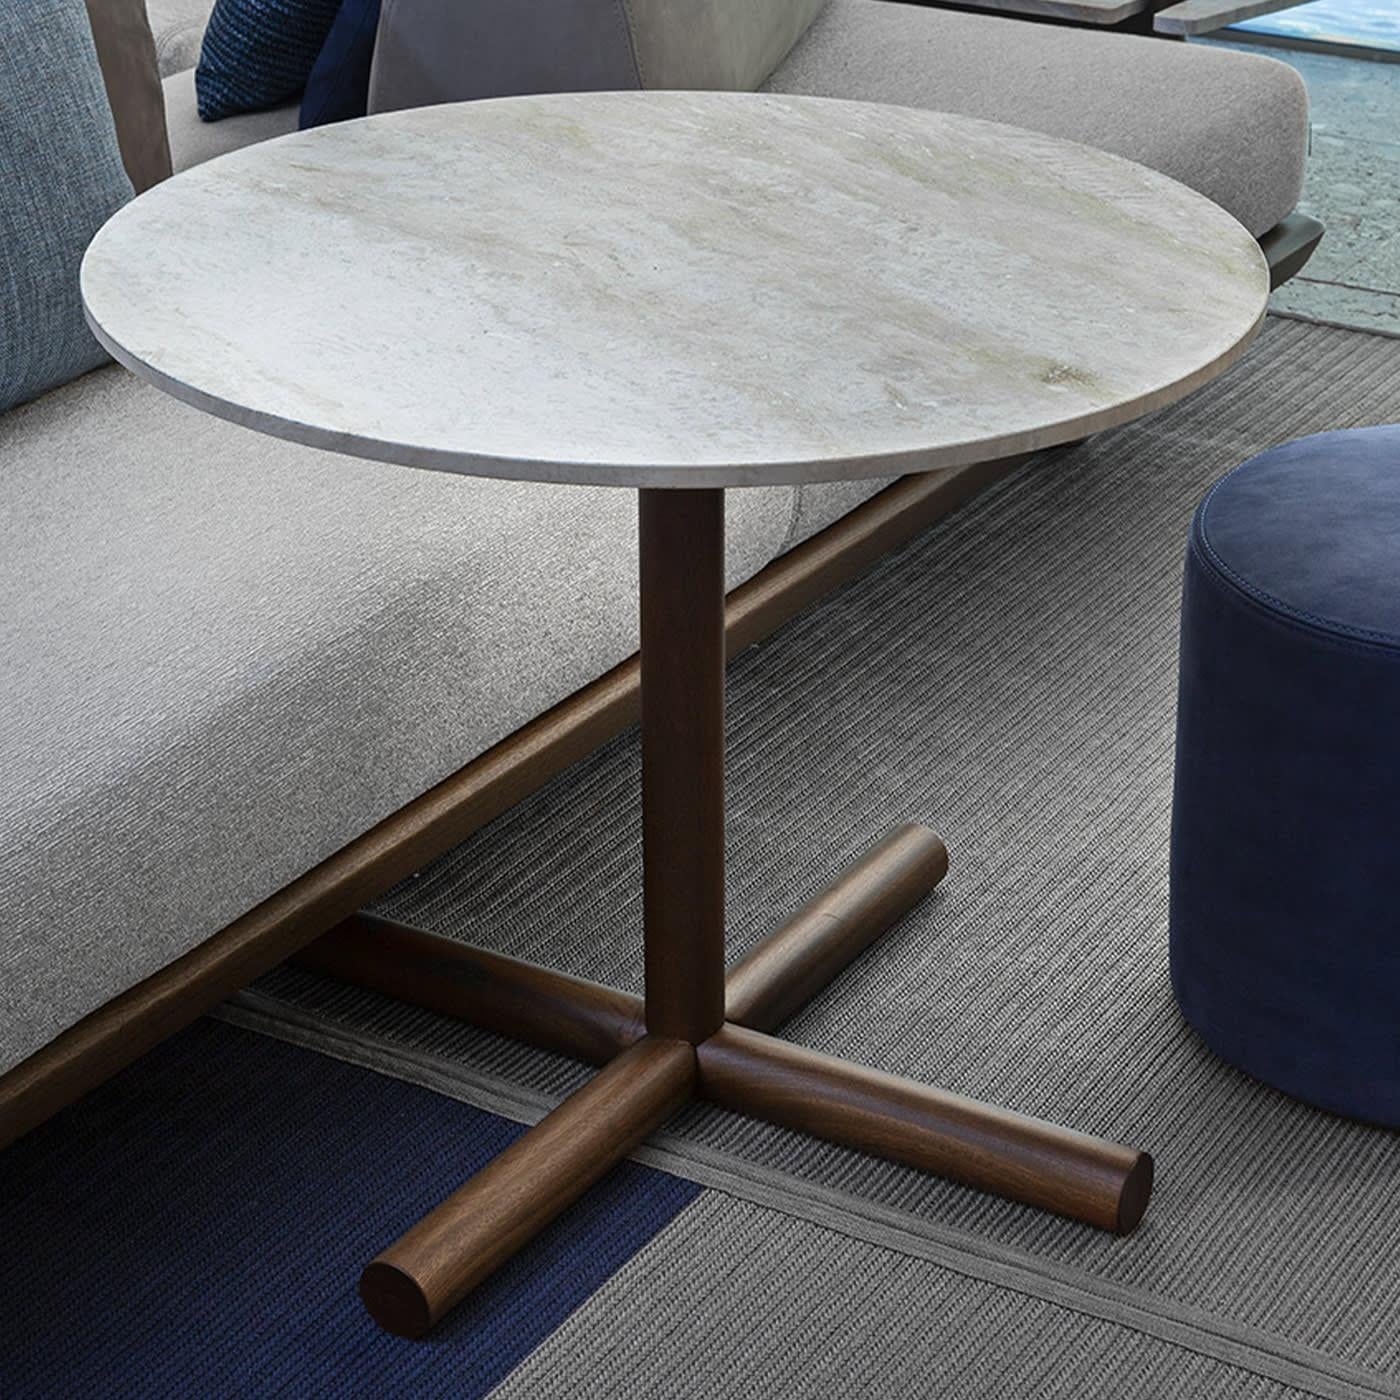 Marble and wood merge splendidly in this precious item: a clean and minimalist coffee table that celebrates the natural beauty of raw materials. Made of barrique-finished mahogany, the structure features X-shaped feet and a sleek stem, supporting a